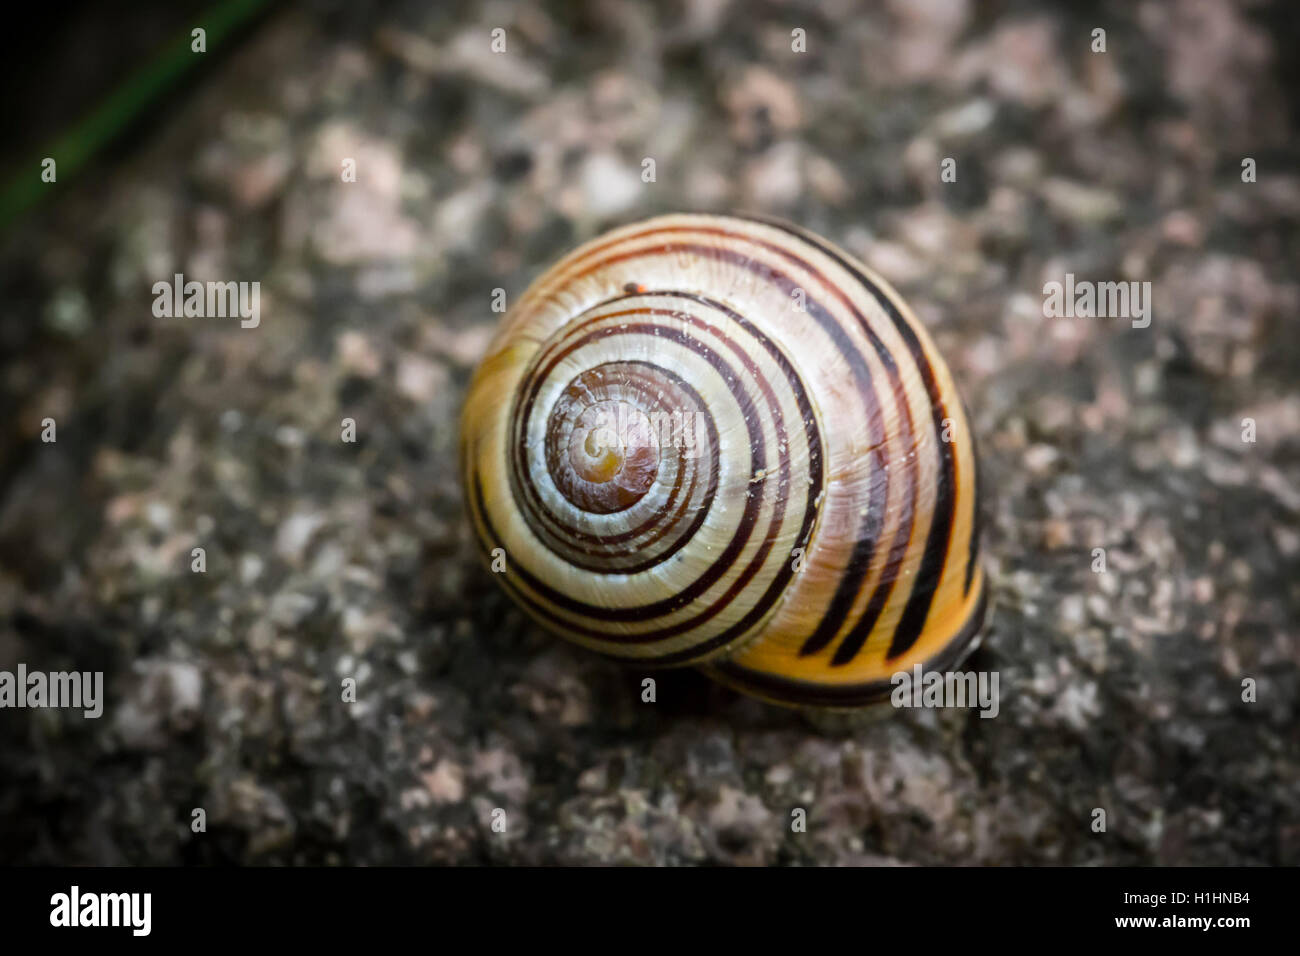 close up of a snail with stripes Stock Photo